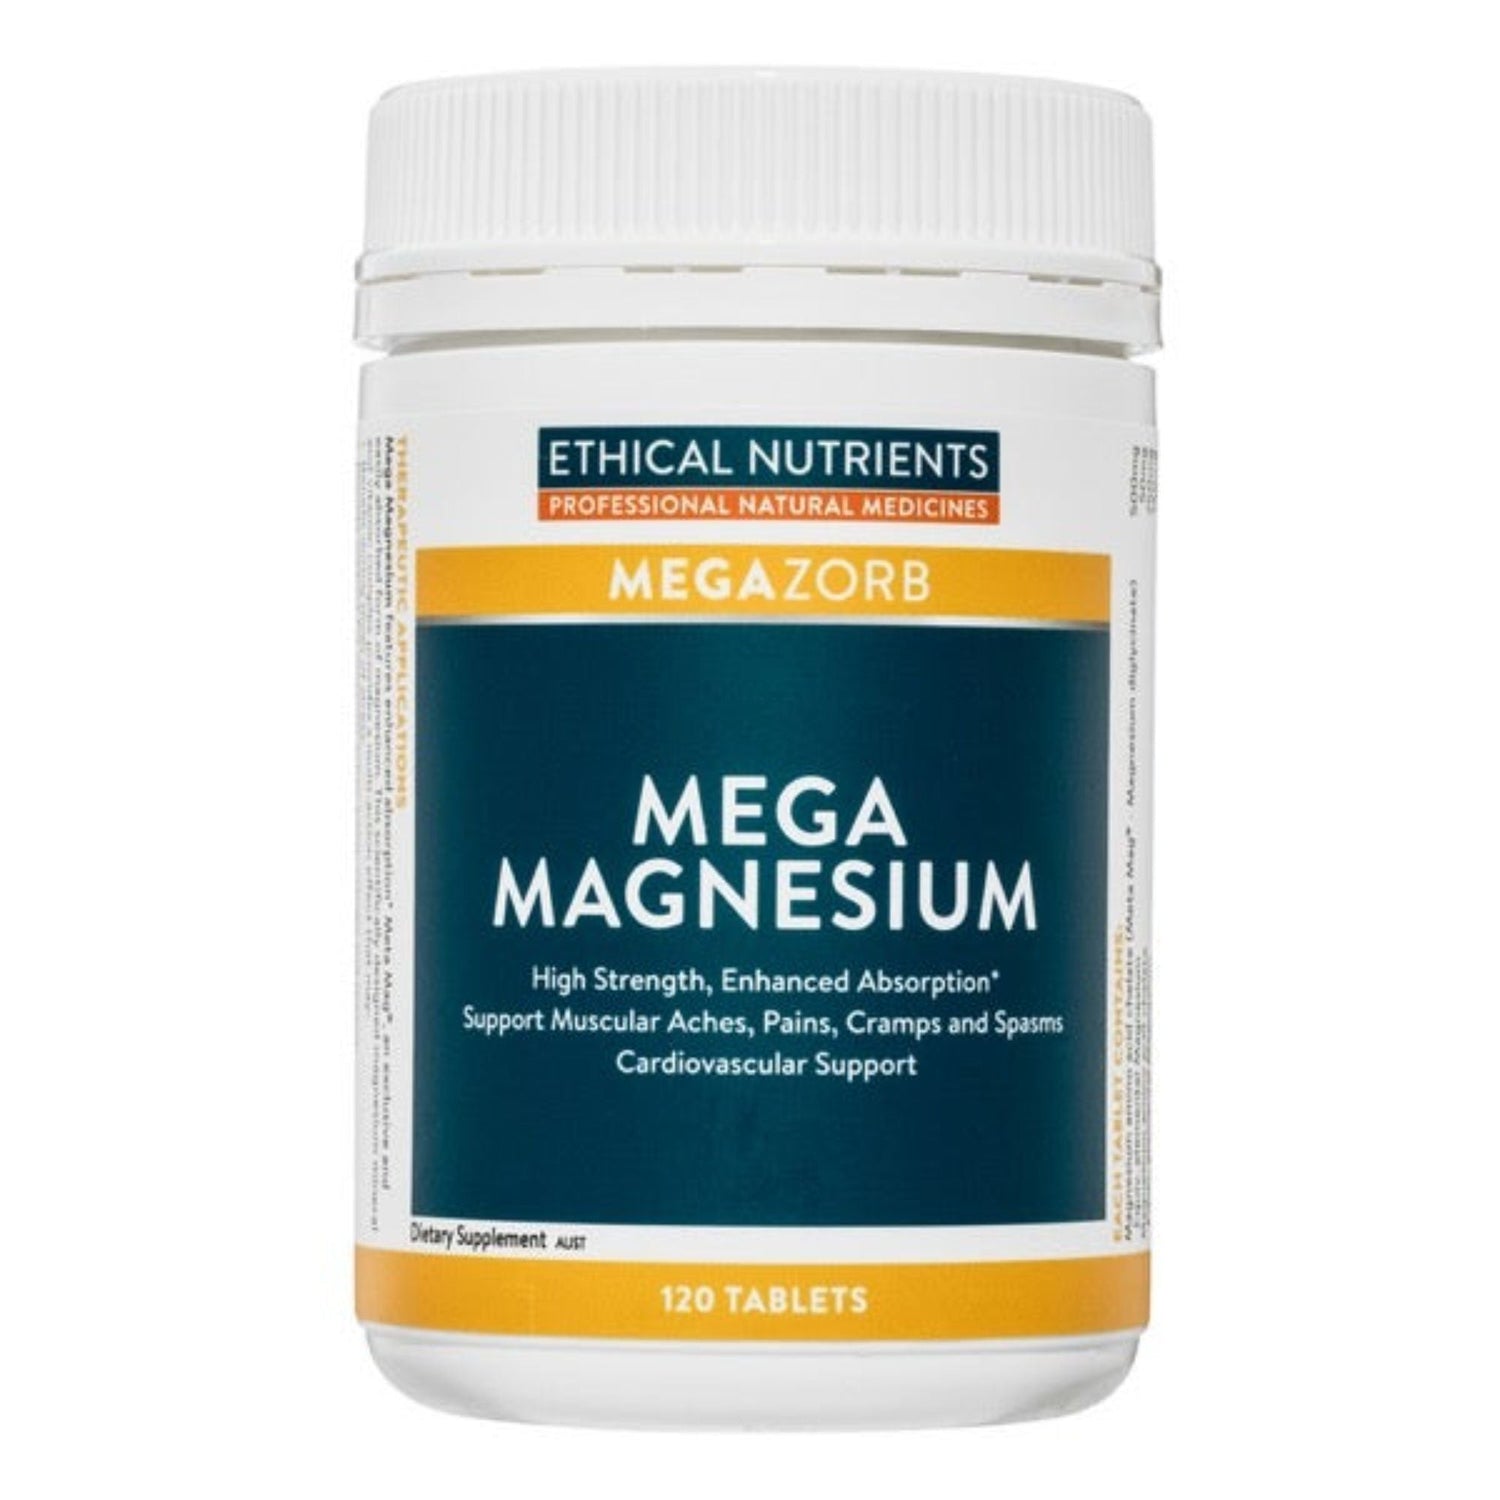 Ethical Nutrients Mega Magnesium Tablet